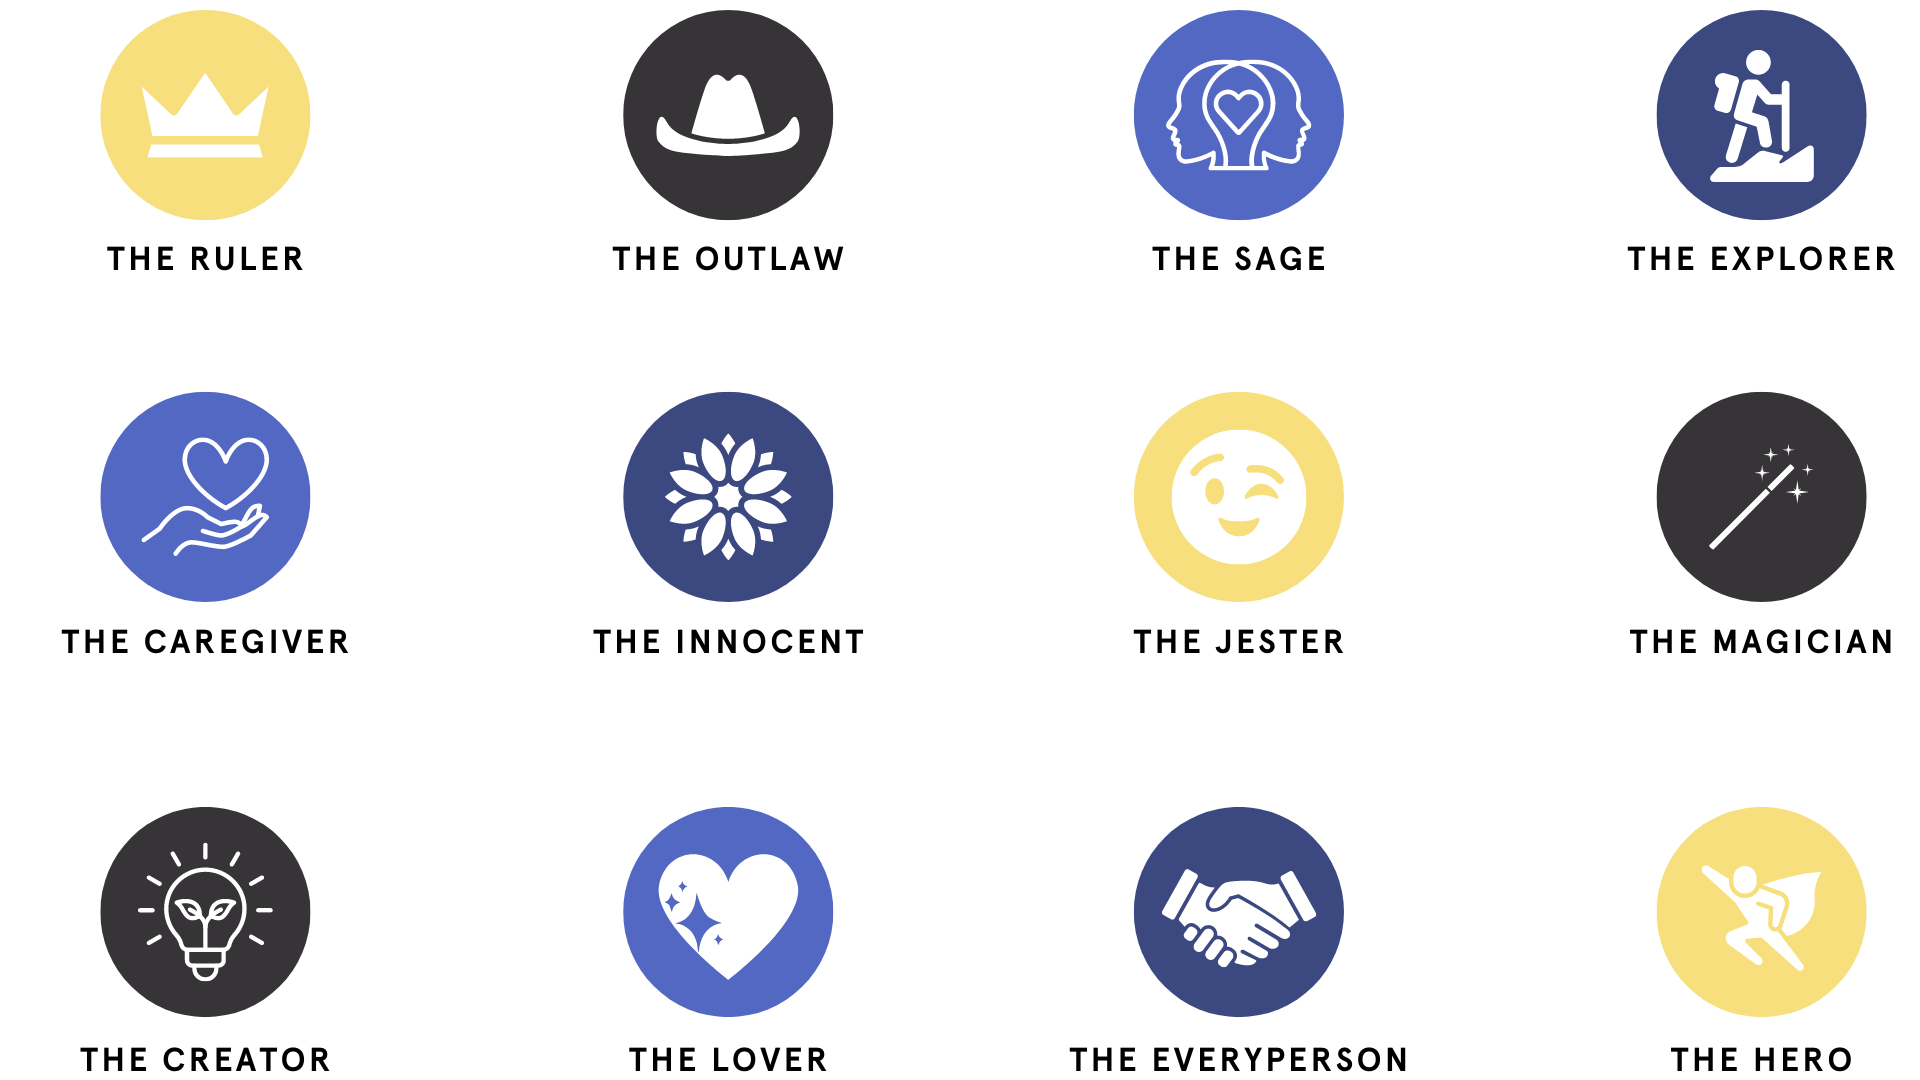 12 round brand archetype icons in various colors like yellow, blue, dark blue, and purple.